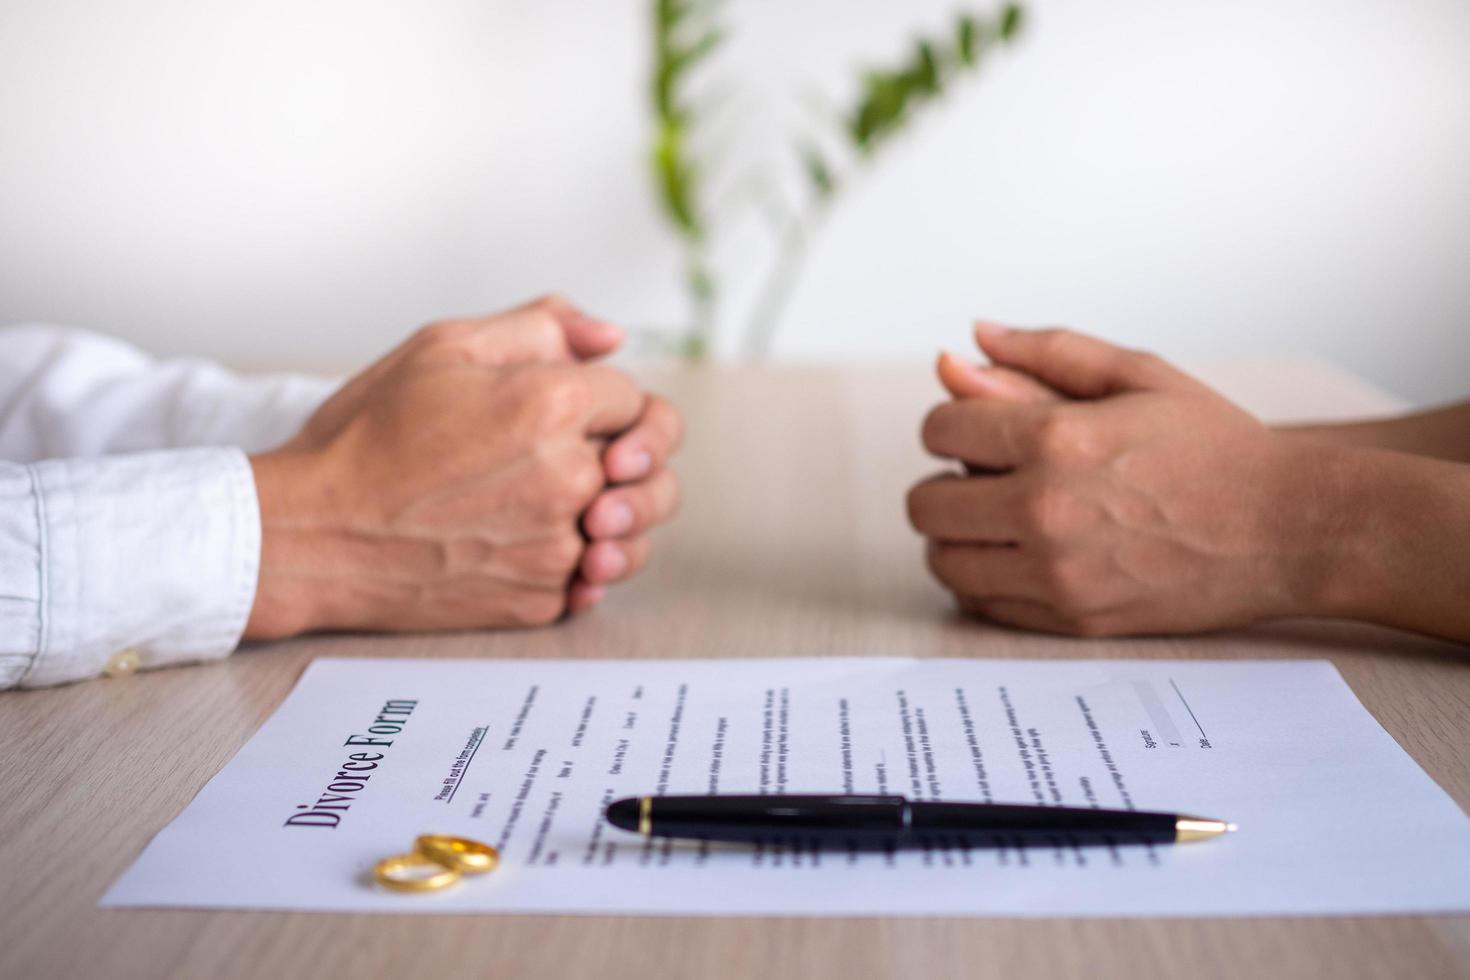 The hands of the wife and husband with the order of divorce, dissolution, cancellation of marriage, legal separation documents, divorce filings or pre-marital agreements prepared by a lawyer. photo